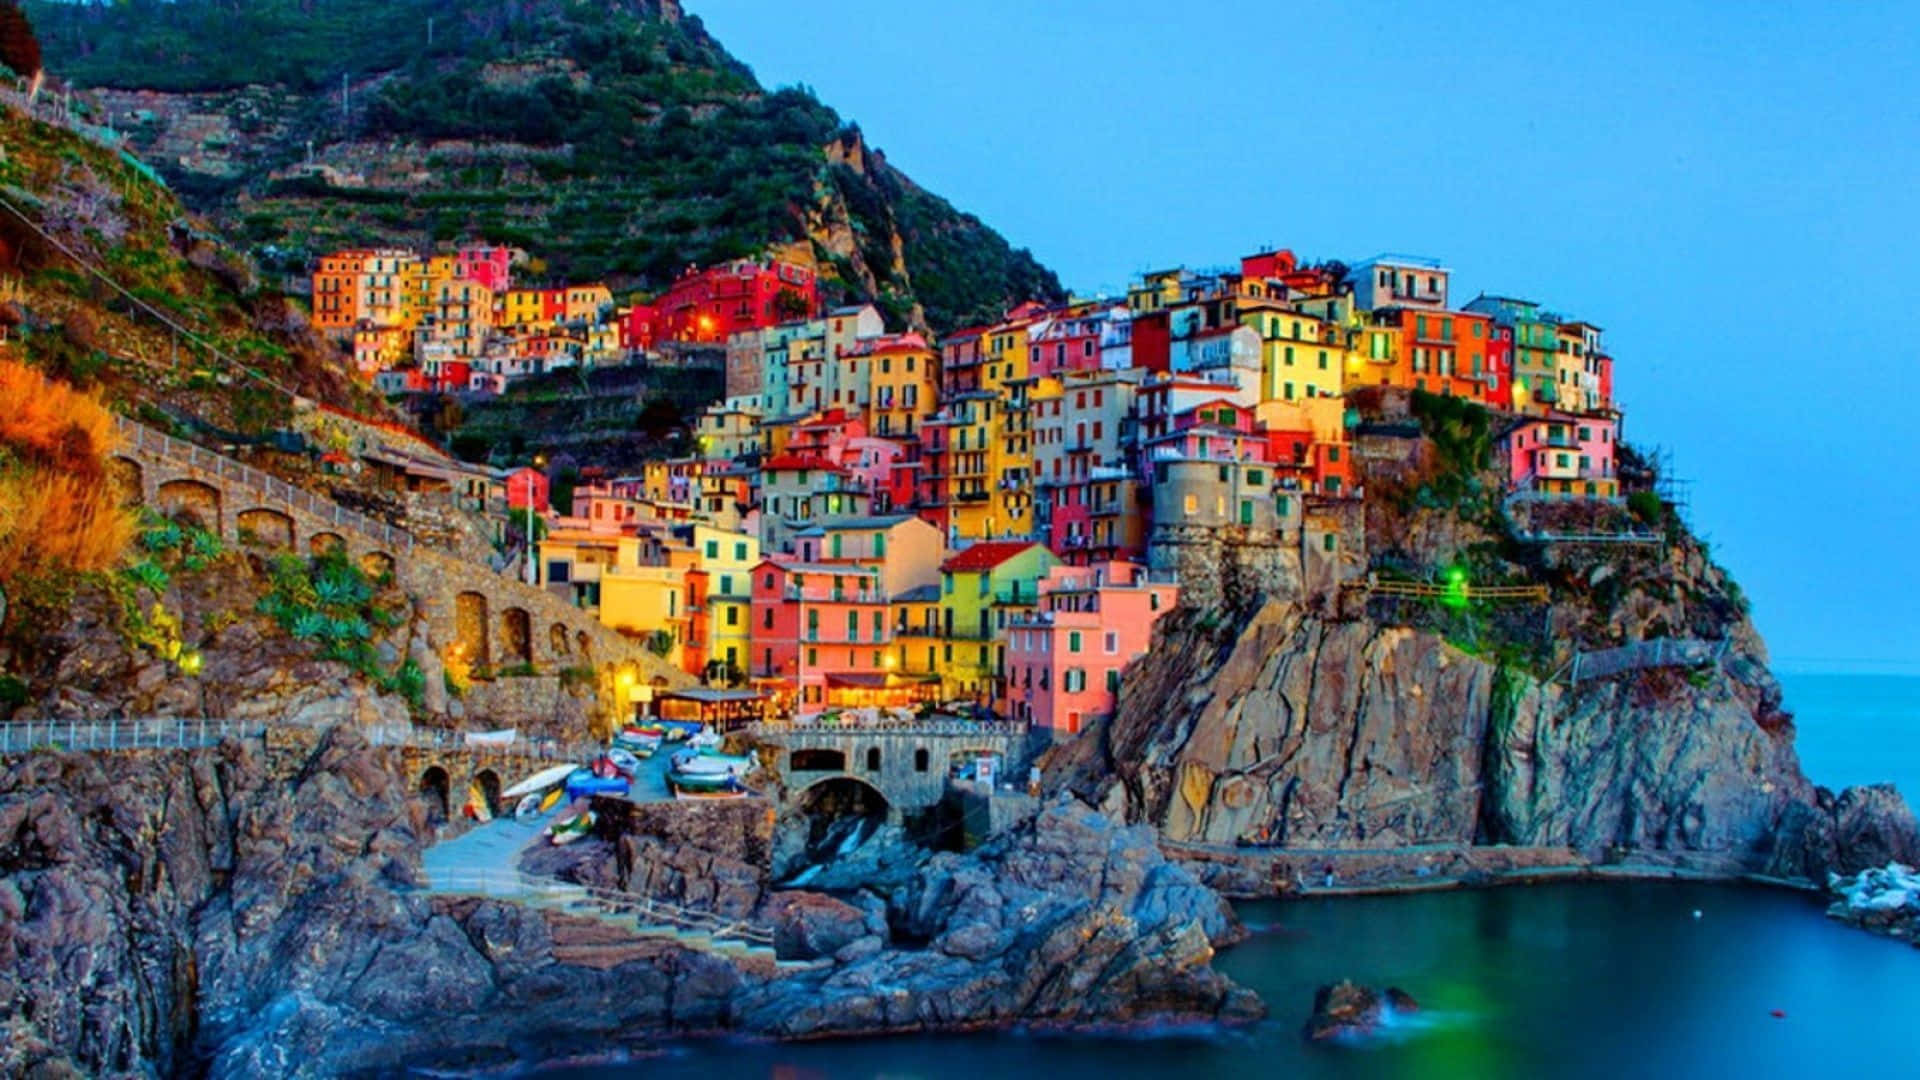 A Colorful Village On A Cliff Overlooking The Ocean